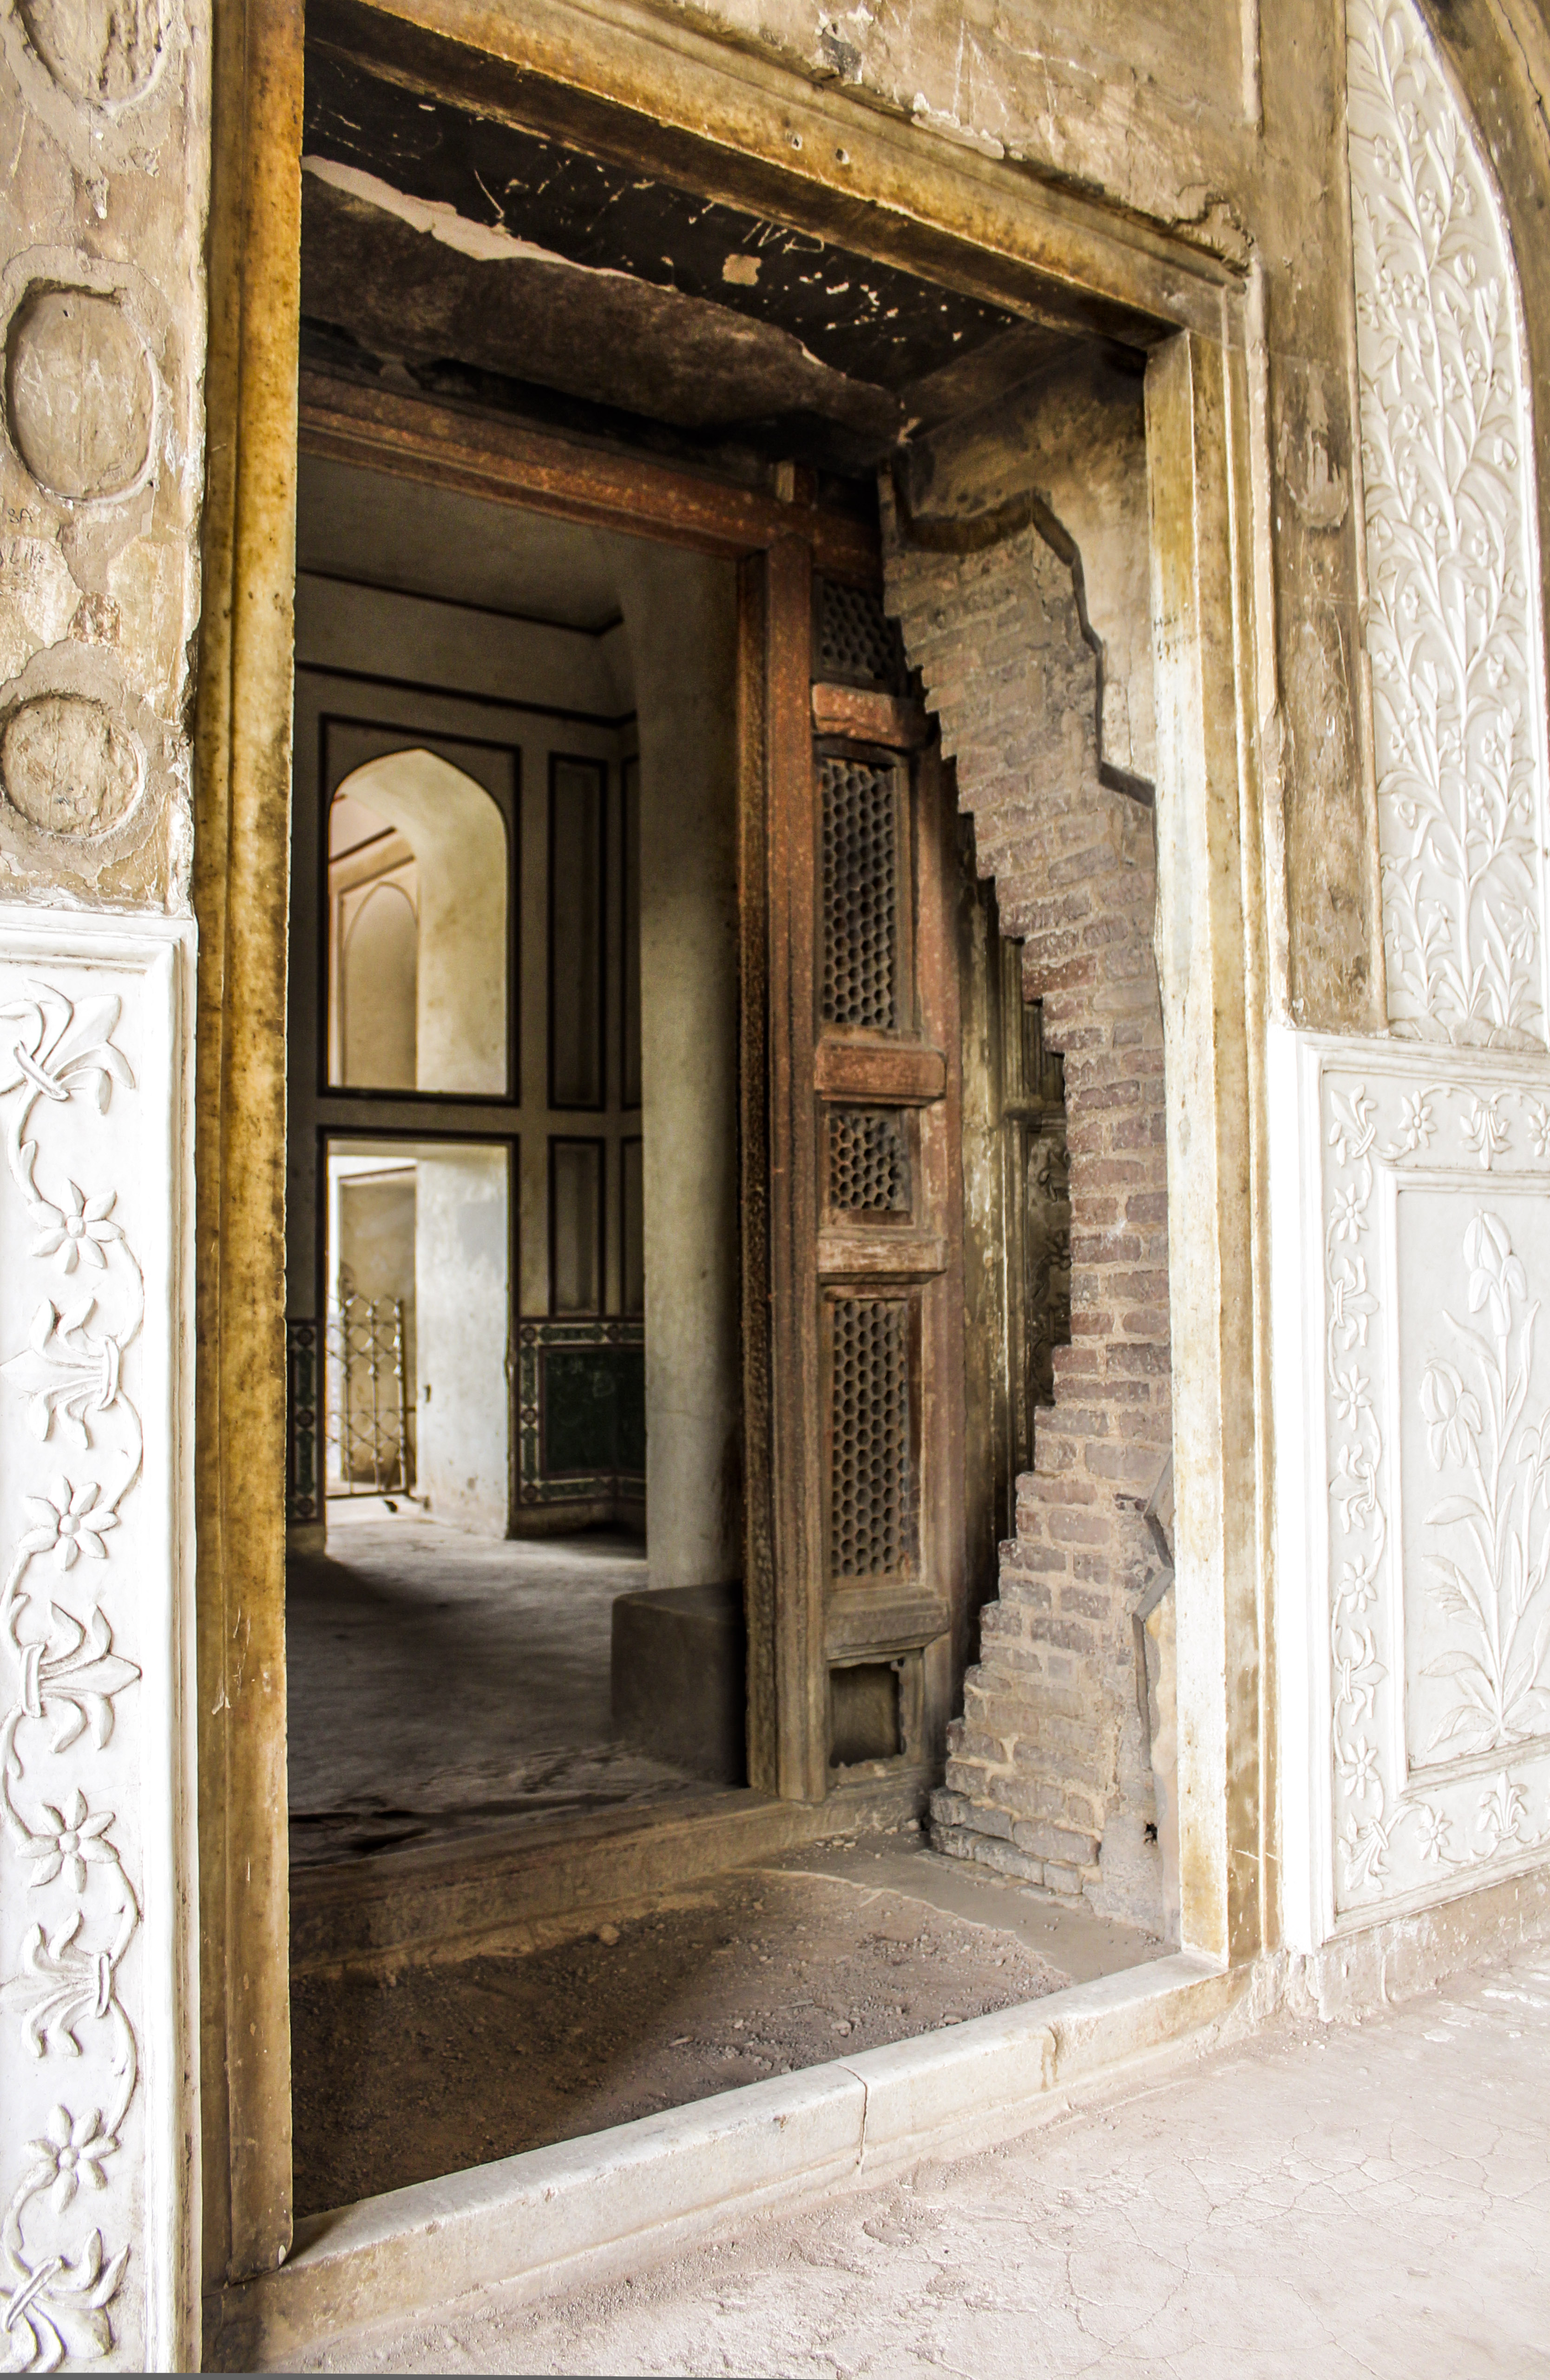 File:Old heritage in lahore fort.jpg - Wikimedia Commons